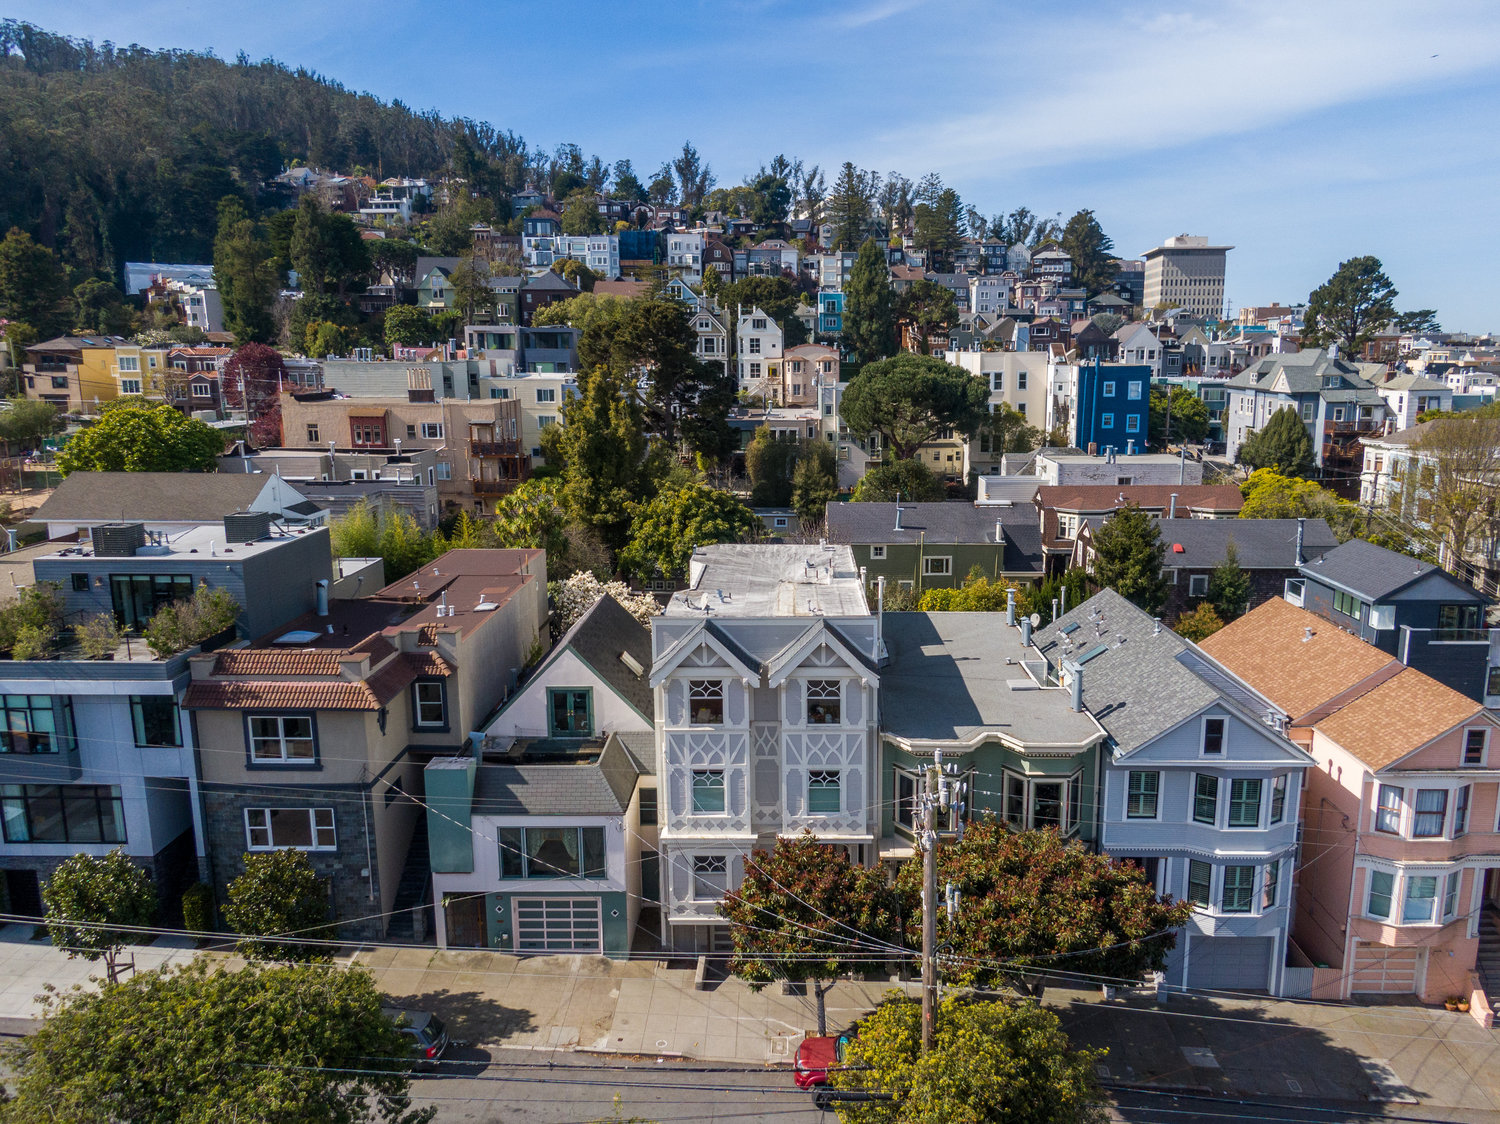 Property Photo: Aerial view of 1223 Shrader Street, showing a three story home in Cole Valley